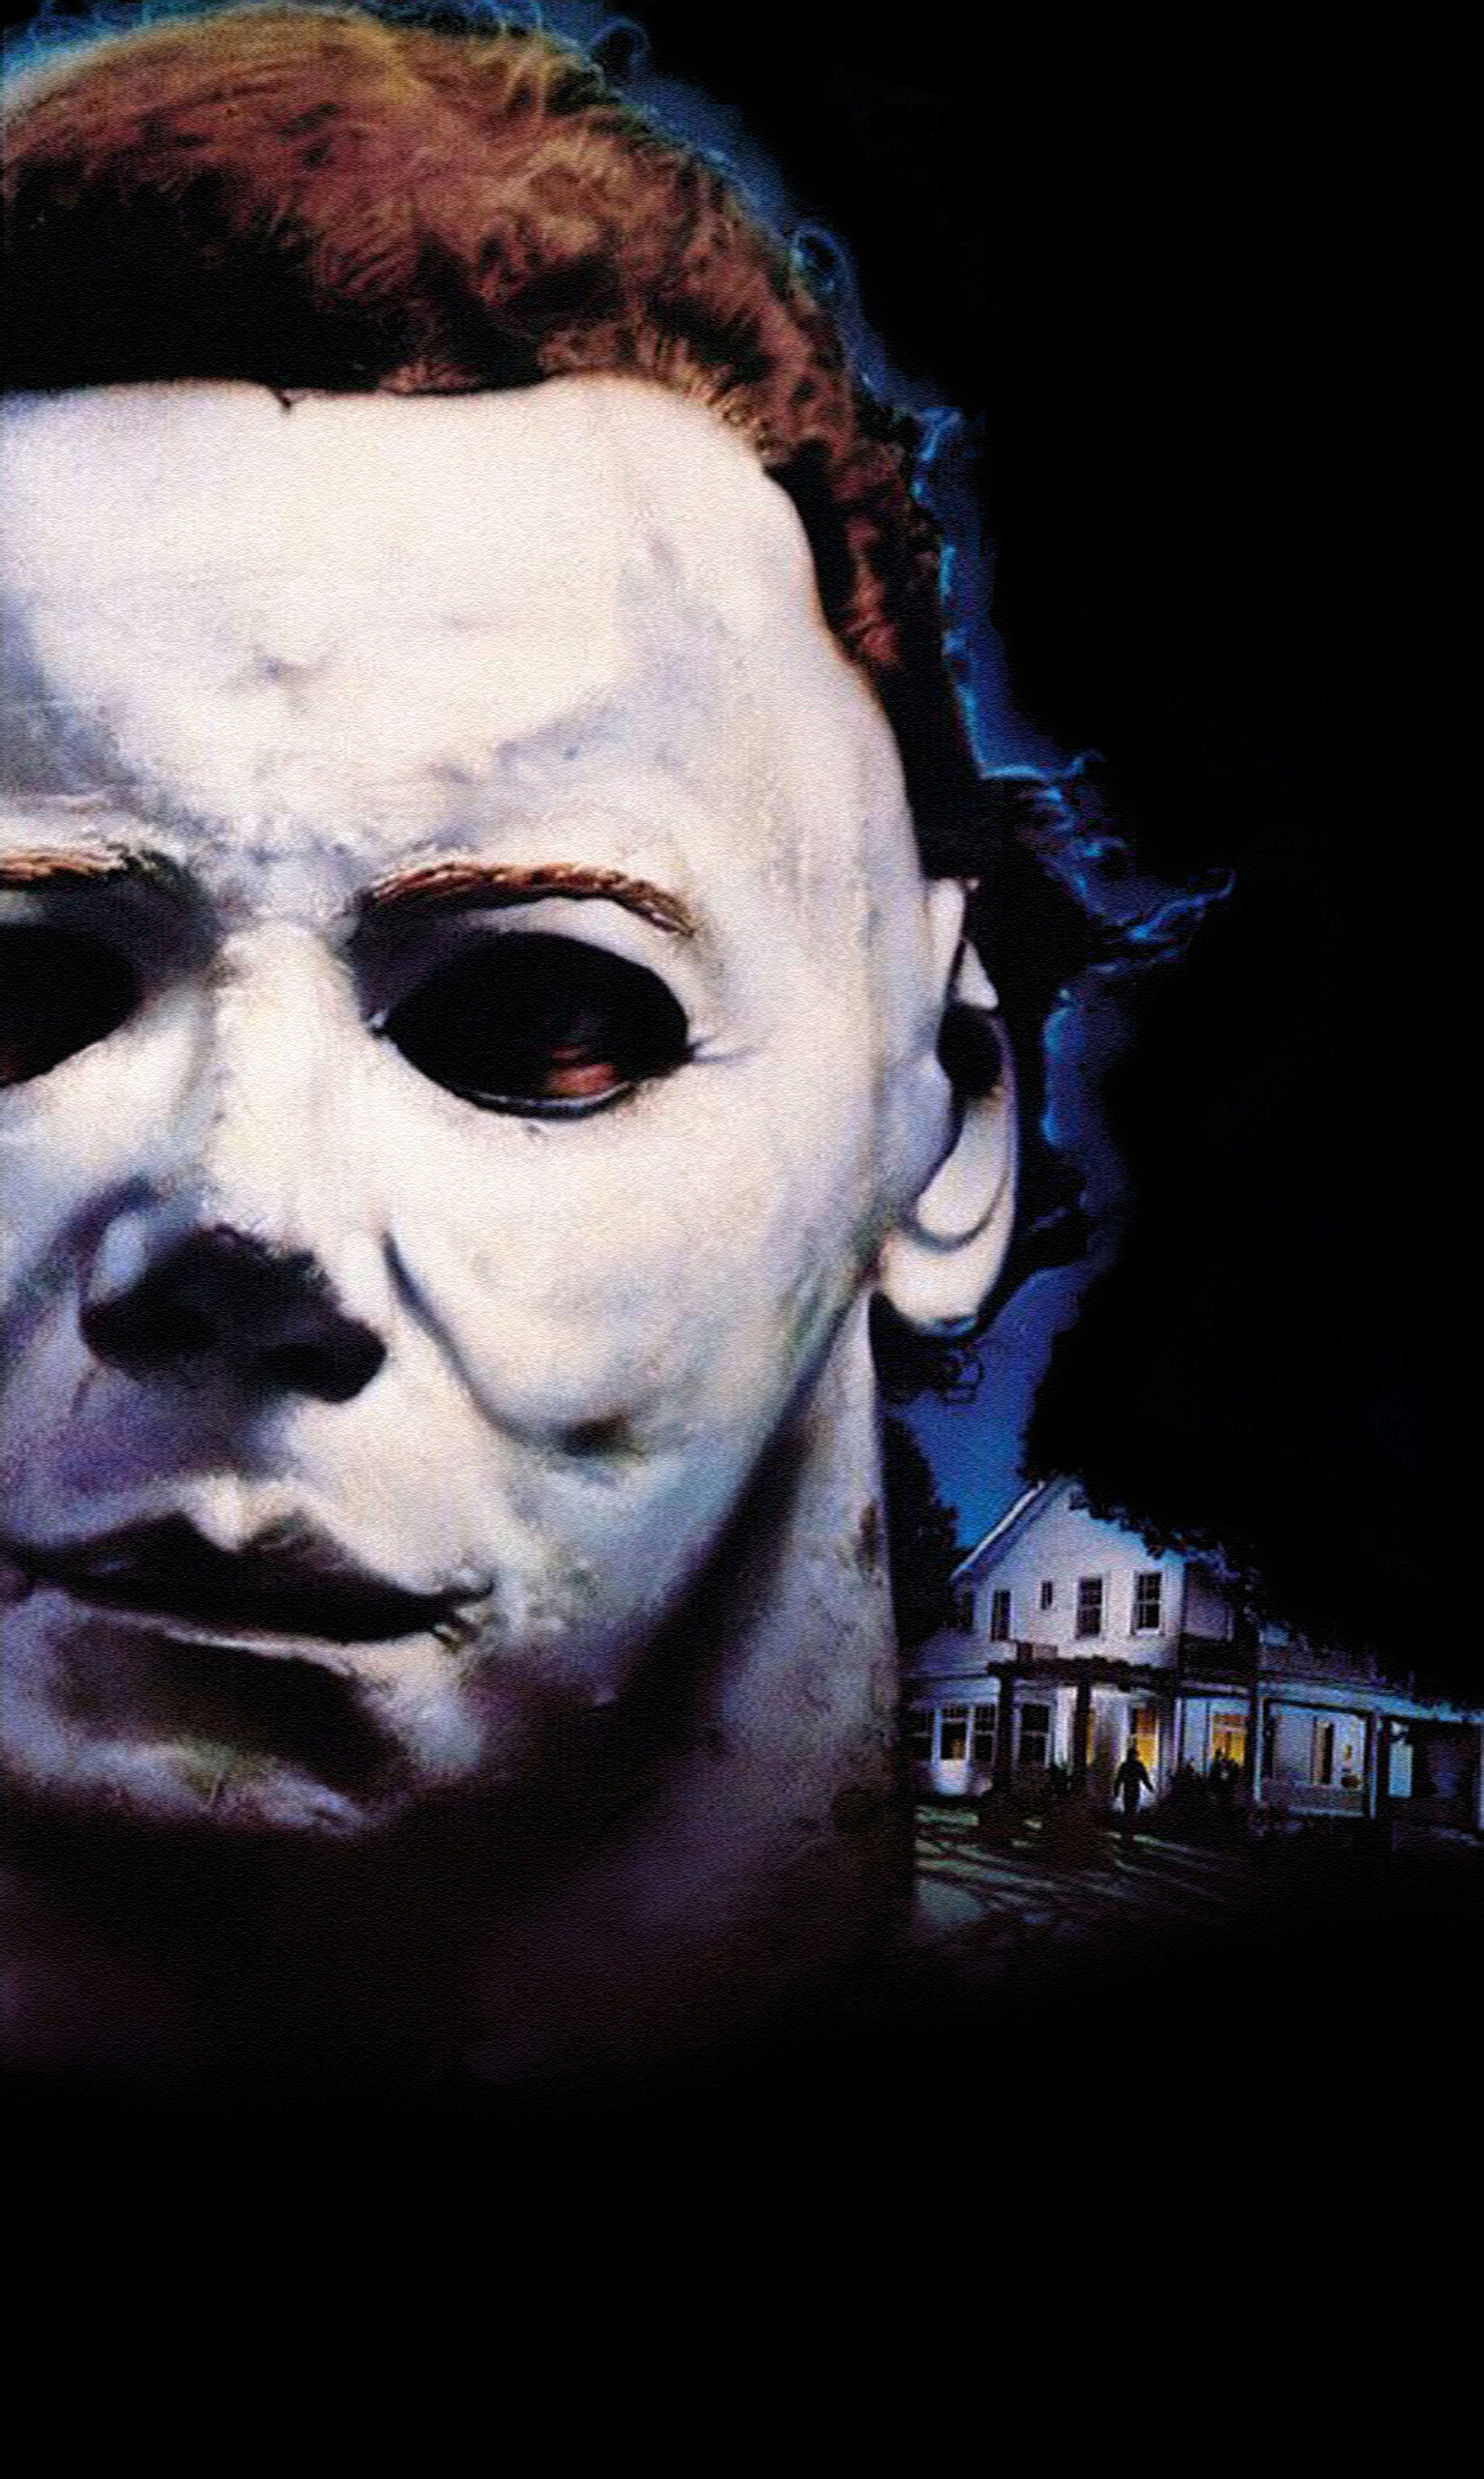 Halloween 4 - Michael Myers Movie Poster , HD Wallpaper & Backgrounds